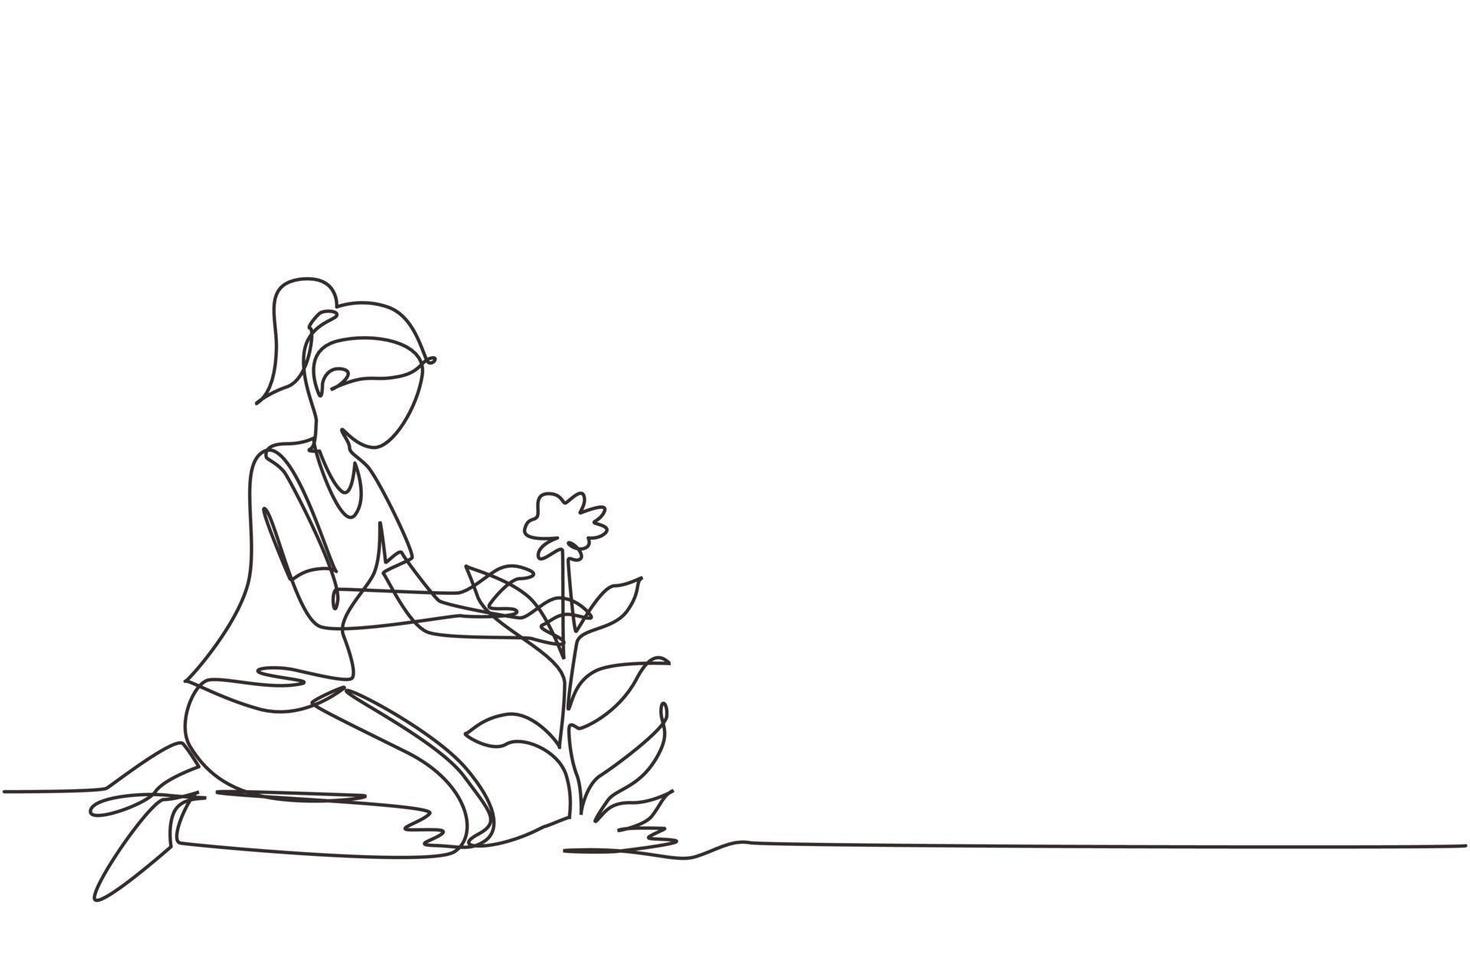 Single one line drawing young woman plants flowers at ground. Cute girl transplants plants, doing gardening, preparation to spring. Home hobby, relaxation concept. Continuous line draw design vector